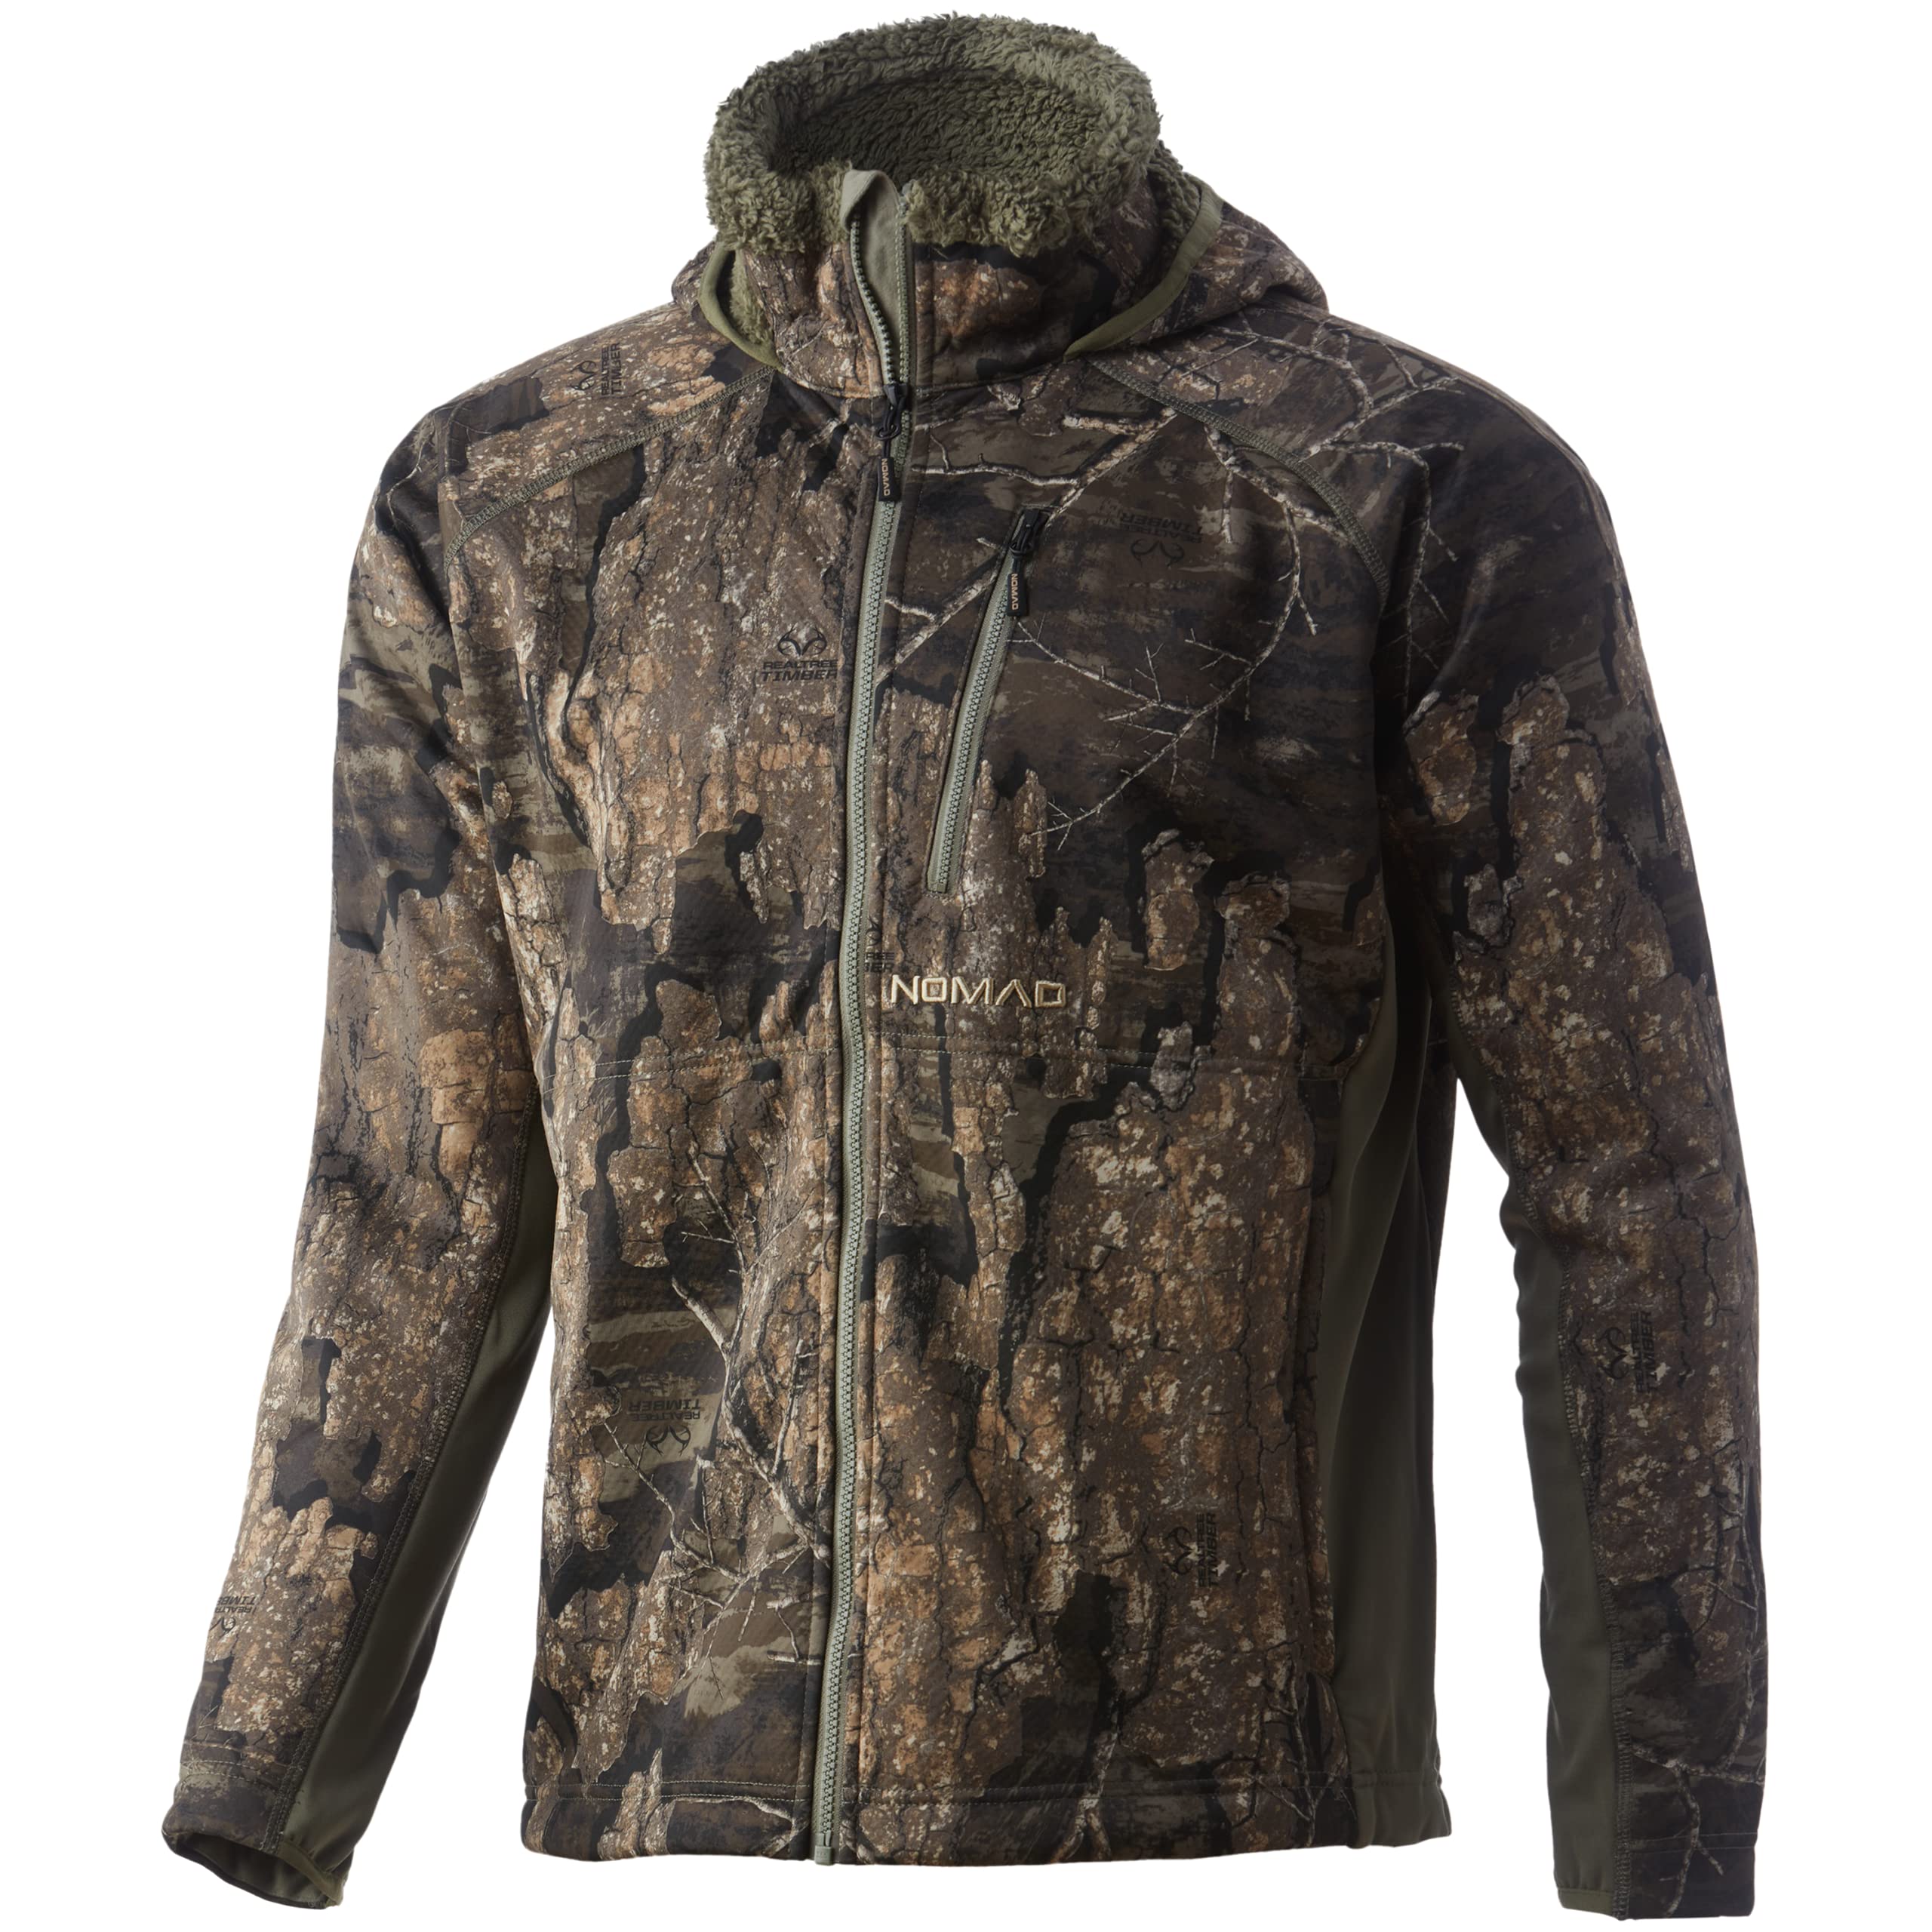 Nomad Herren Harvester Nxt Jacket | Wind Resistant W/Sound Kill Tech Jacke, Realtree Timber Camouflage, Large